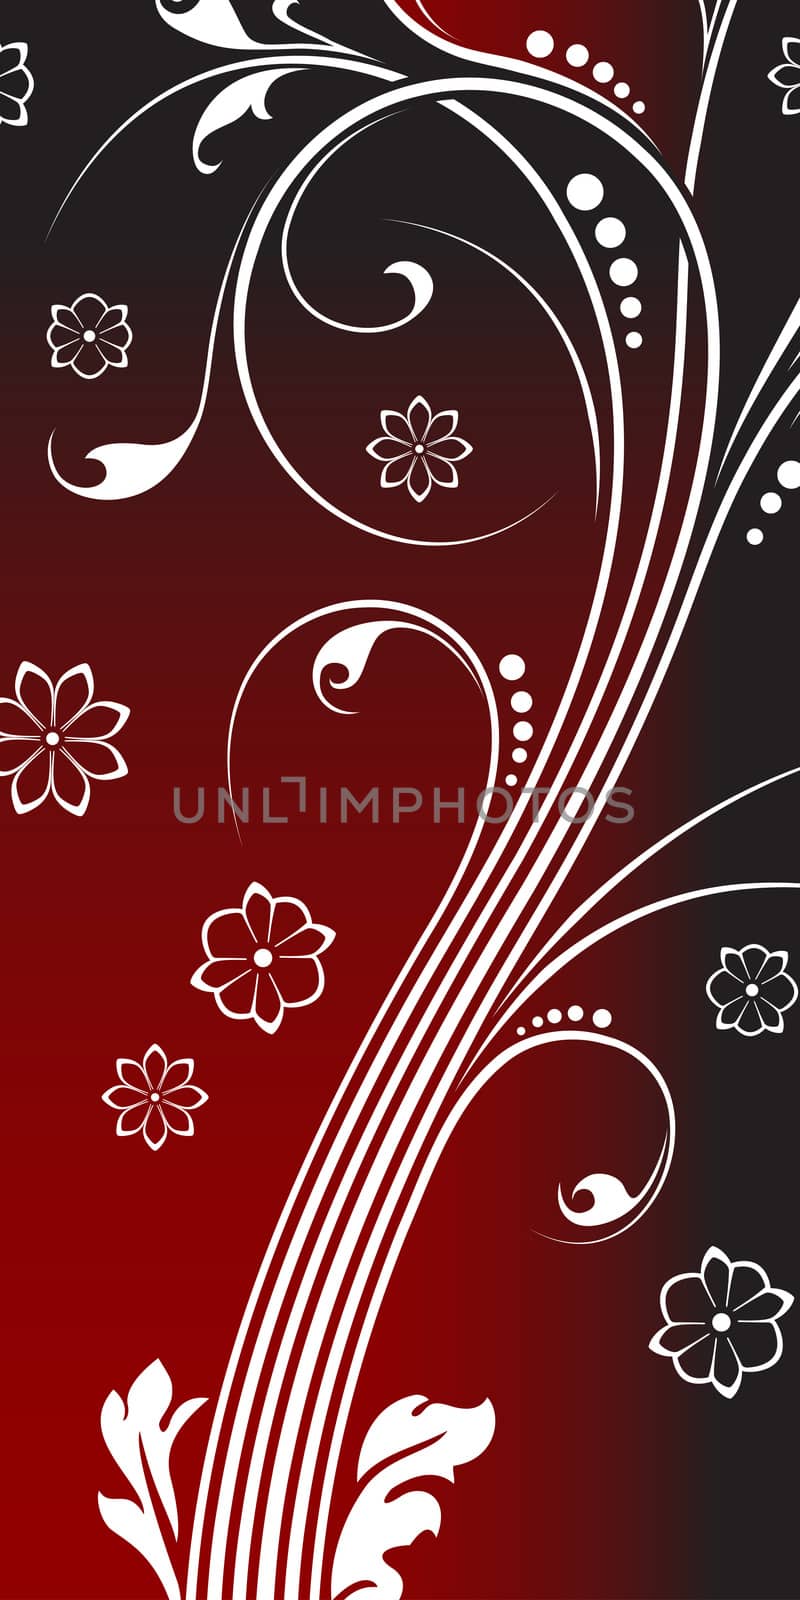 Abstract background witn floral scrolls on red